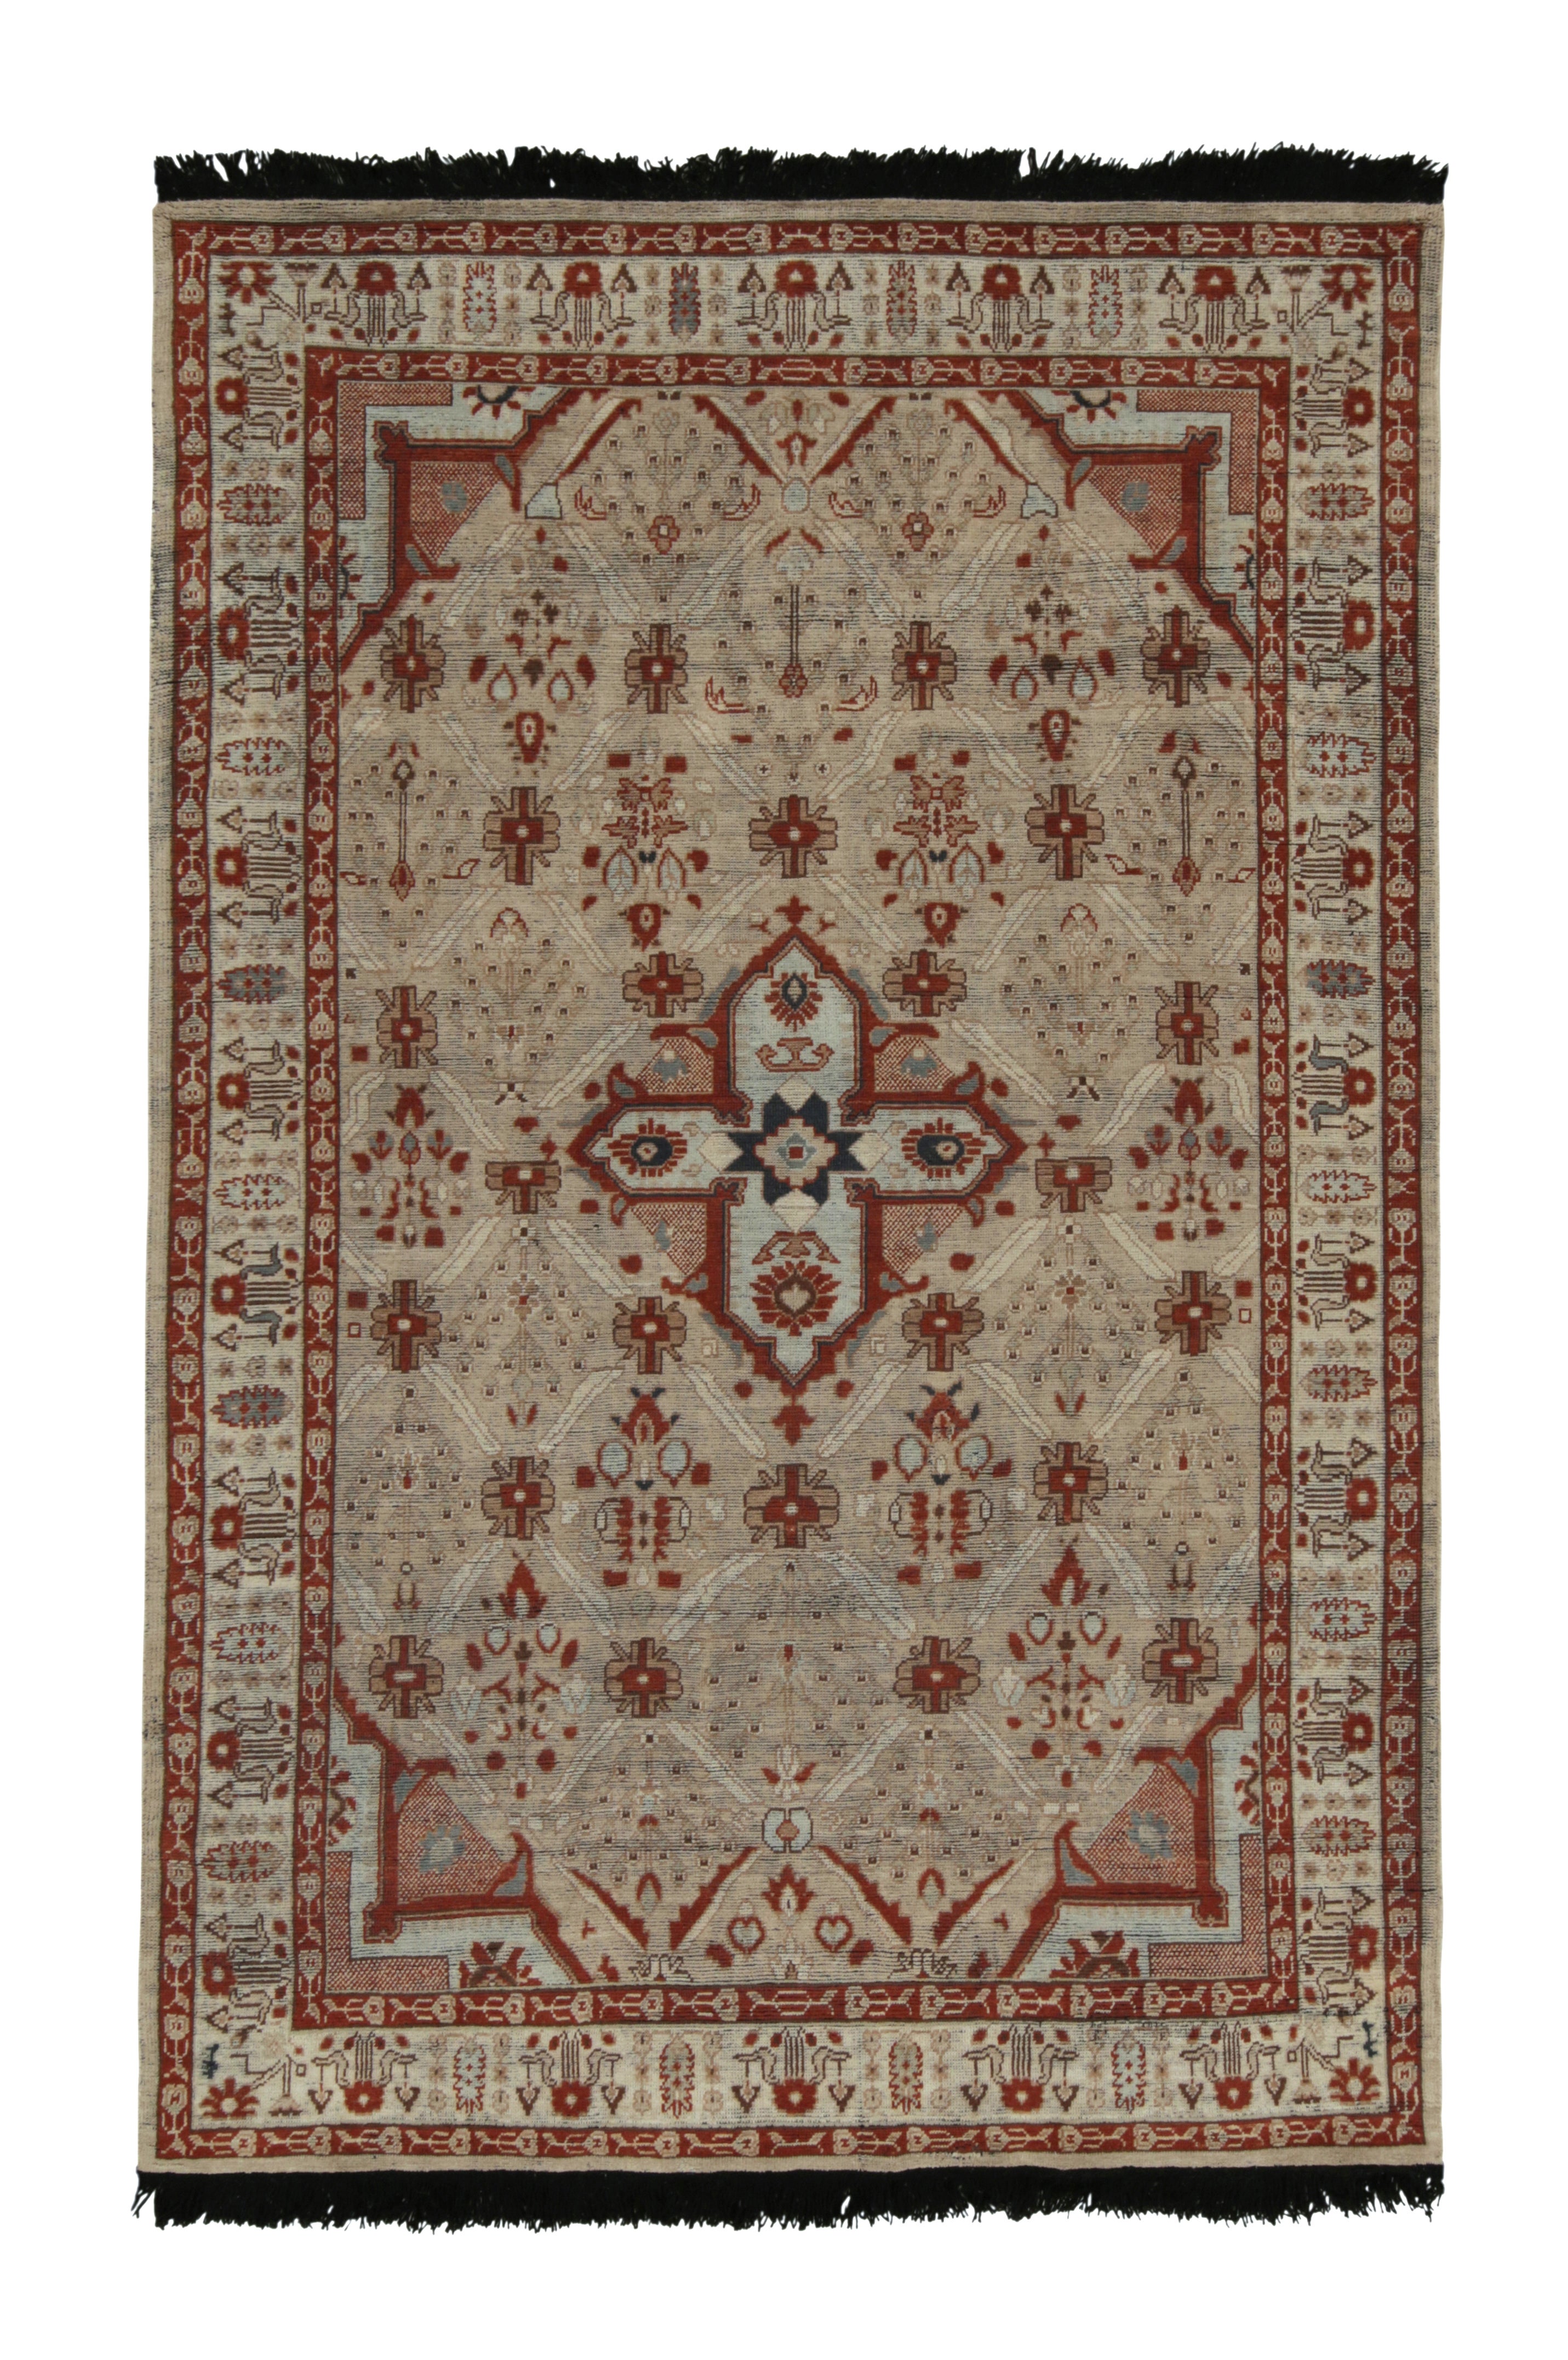 Rug & Kilim’s Tribal Style Rug in Gray, Red and Brown Geometric Patterns For Sale